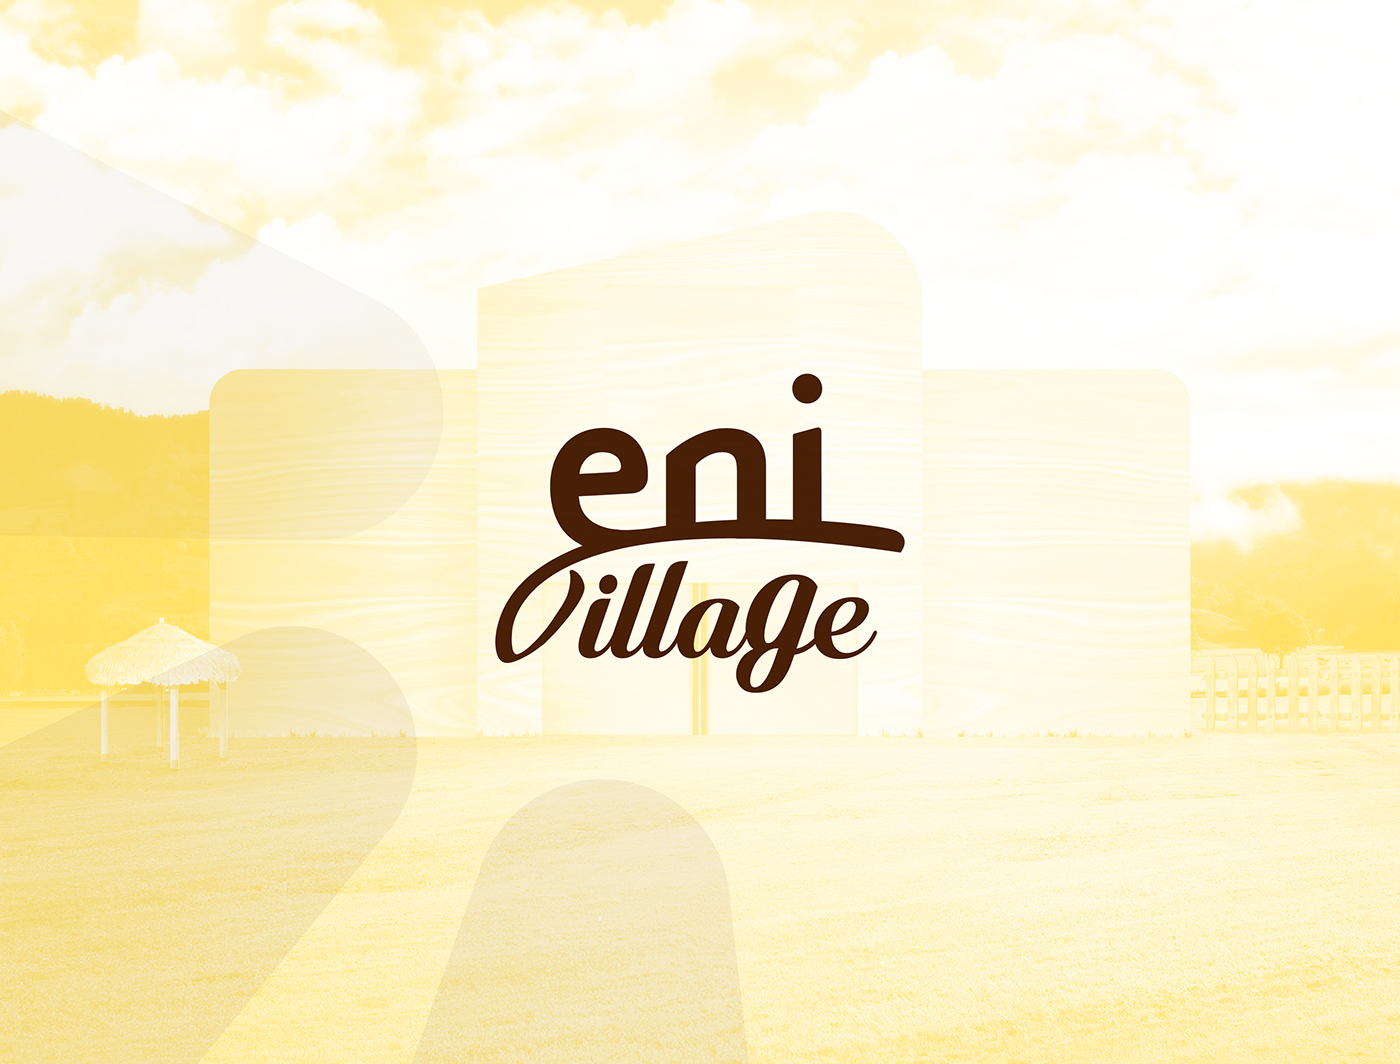 eni Project energy Advertising  campaign Creativity visual graphic village